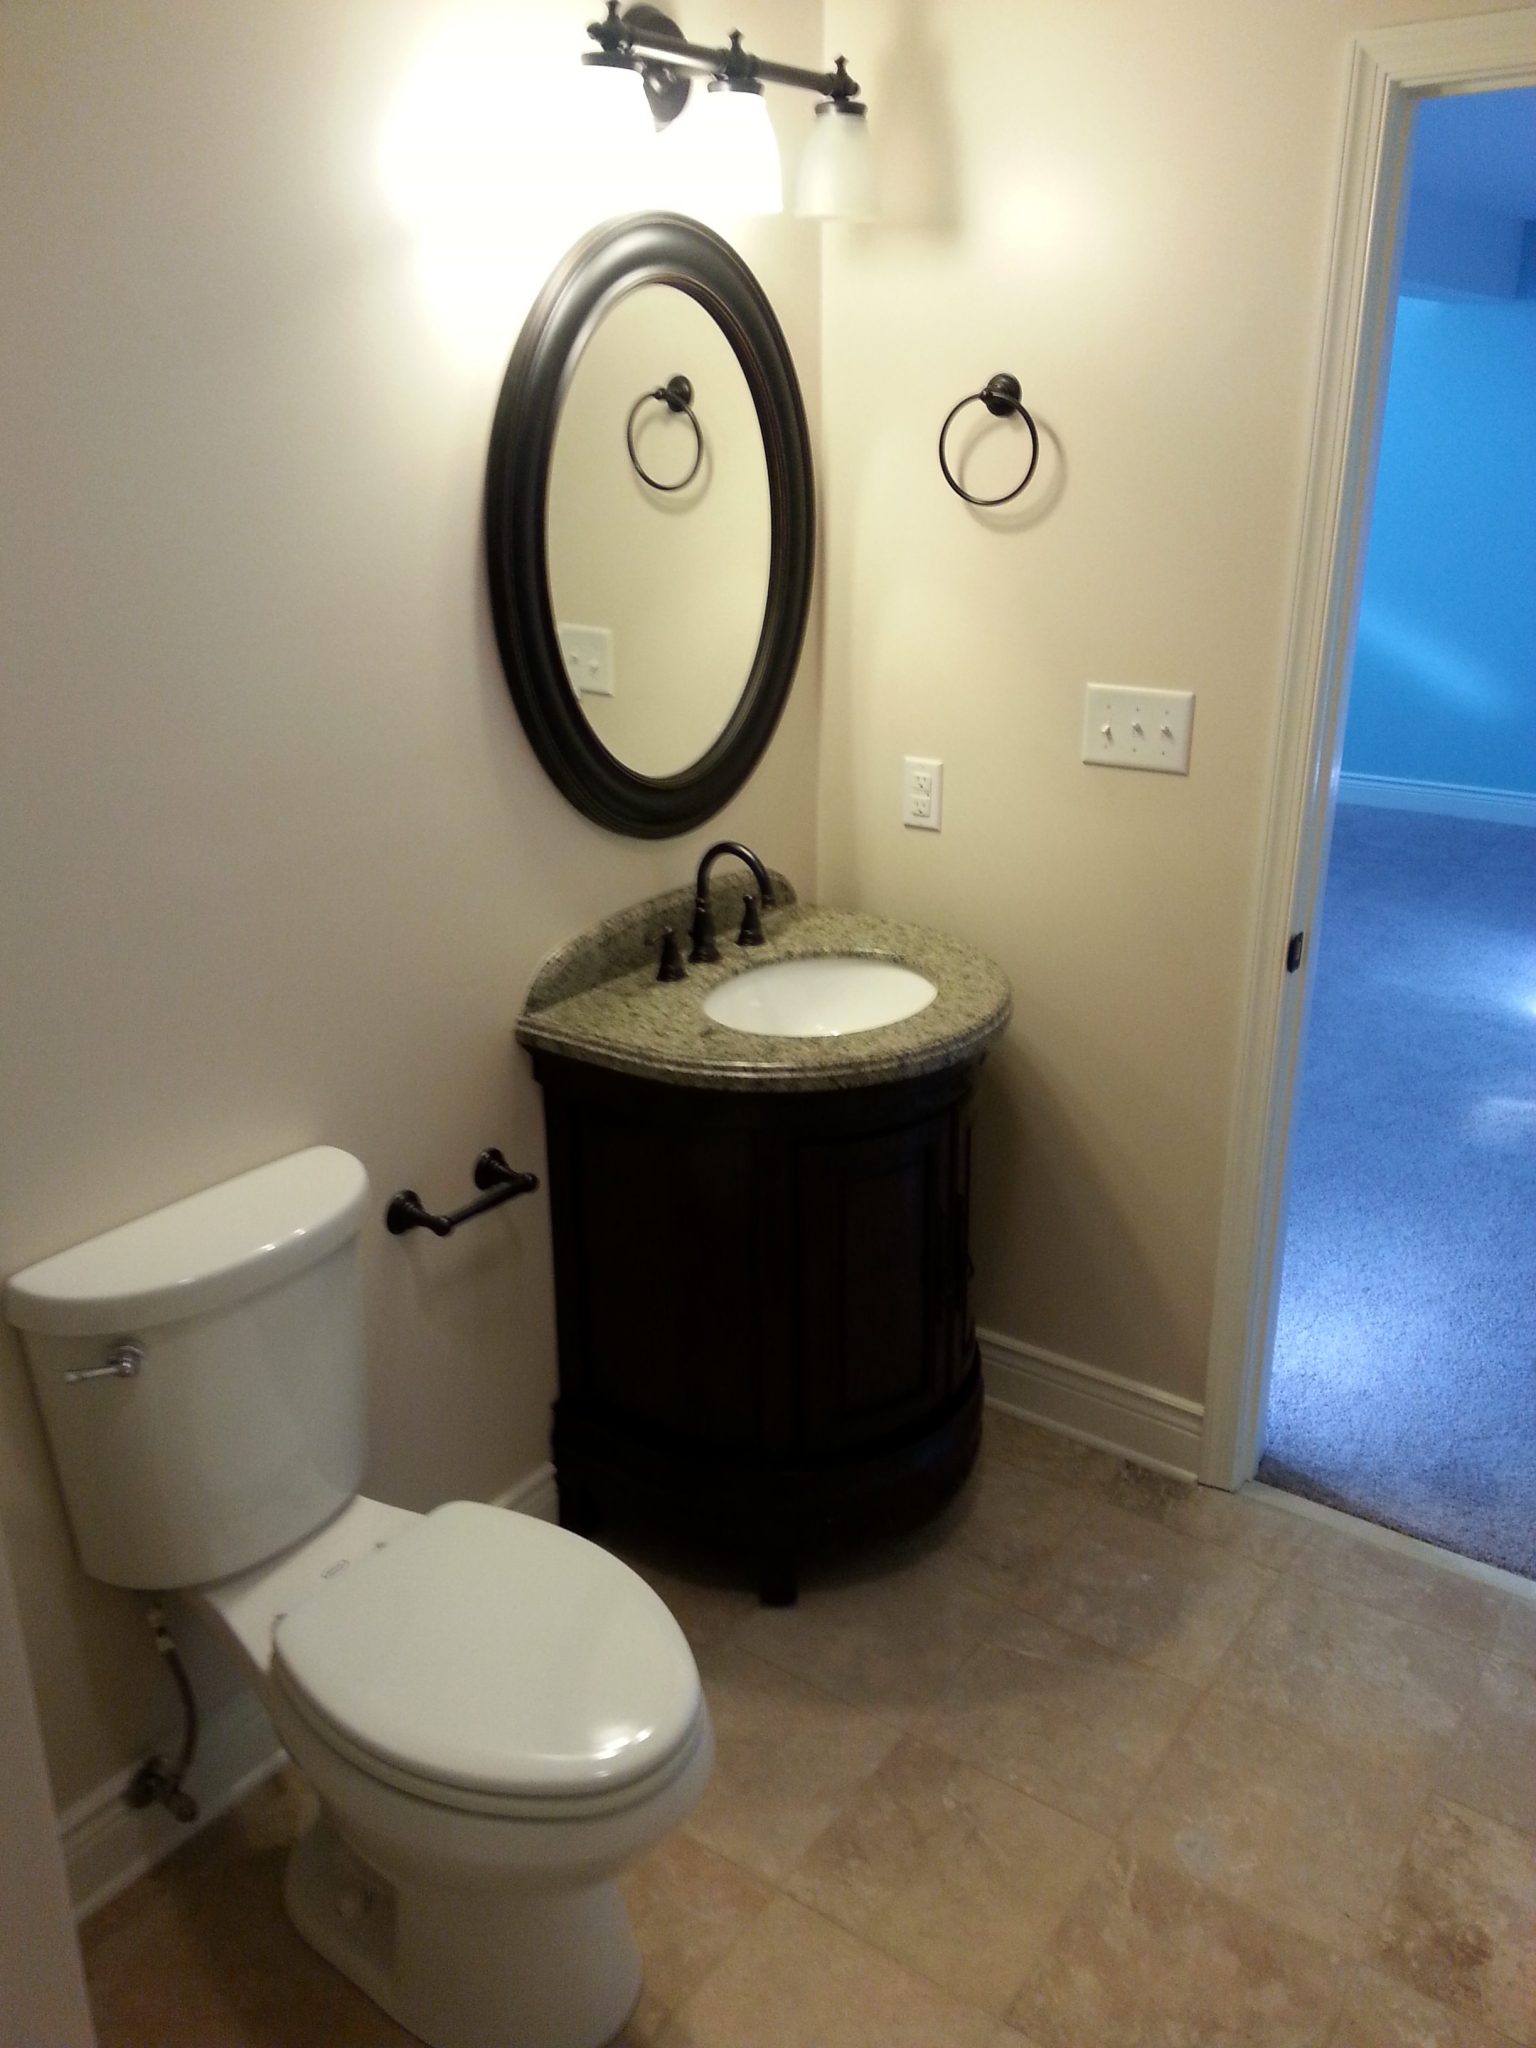 Finished Basement, Bedrooms With Egress Windows, And Upgrades bathroom vanity